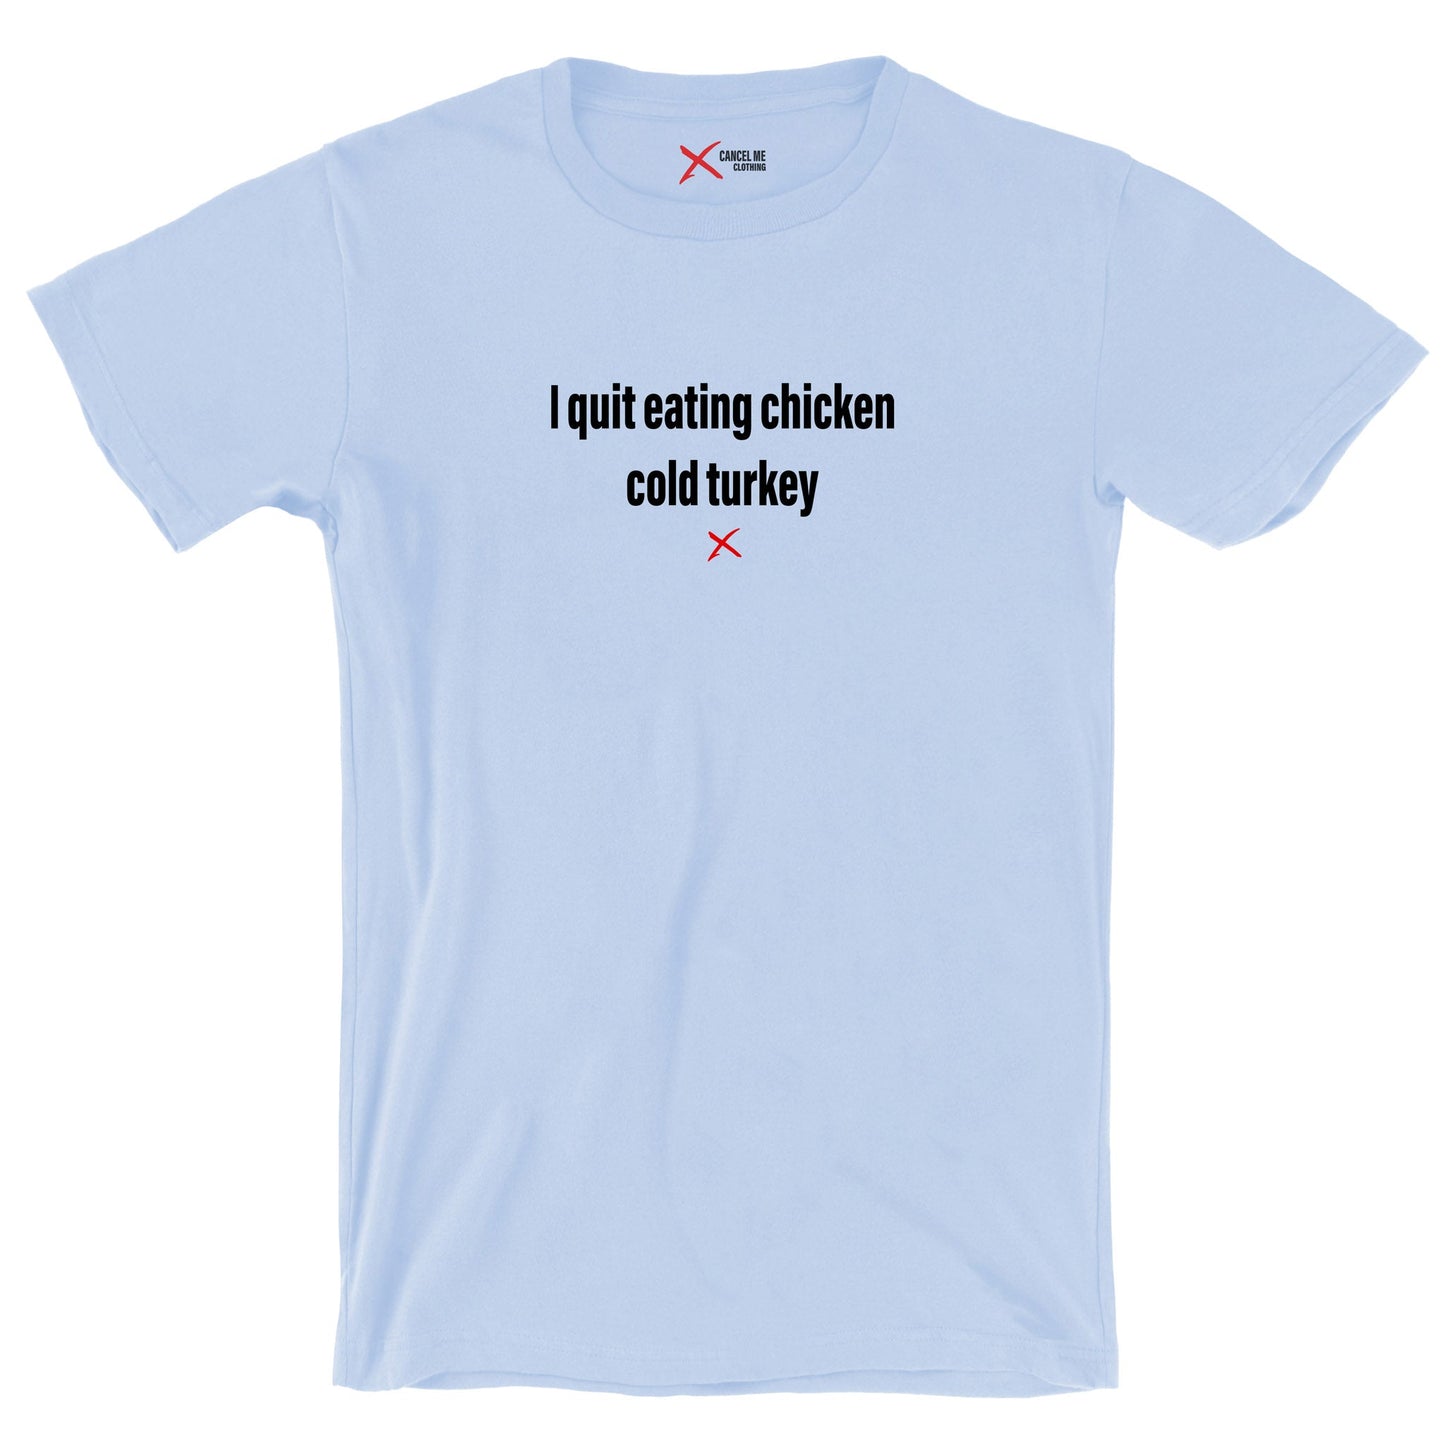 I quit eating chicken cold turkey - Shirt